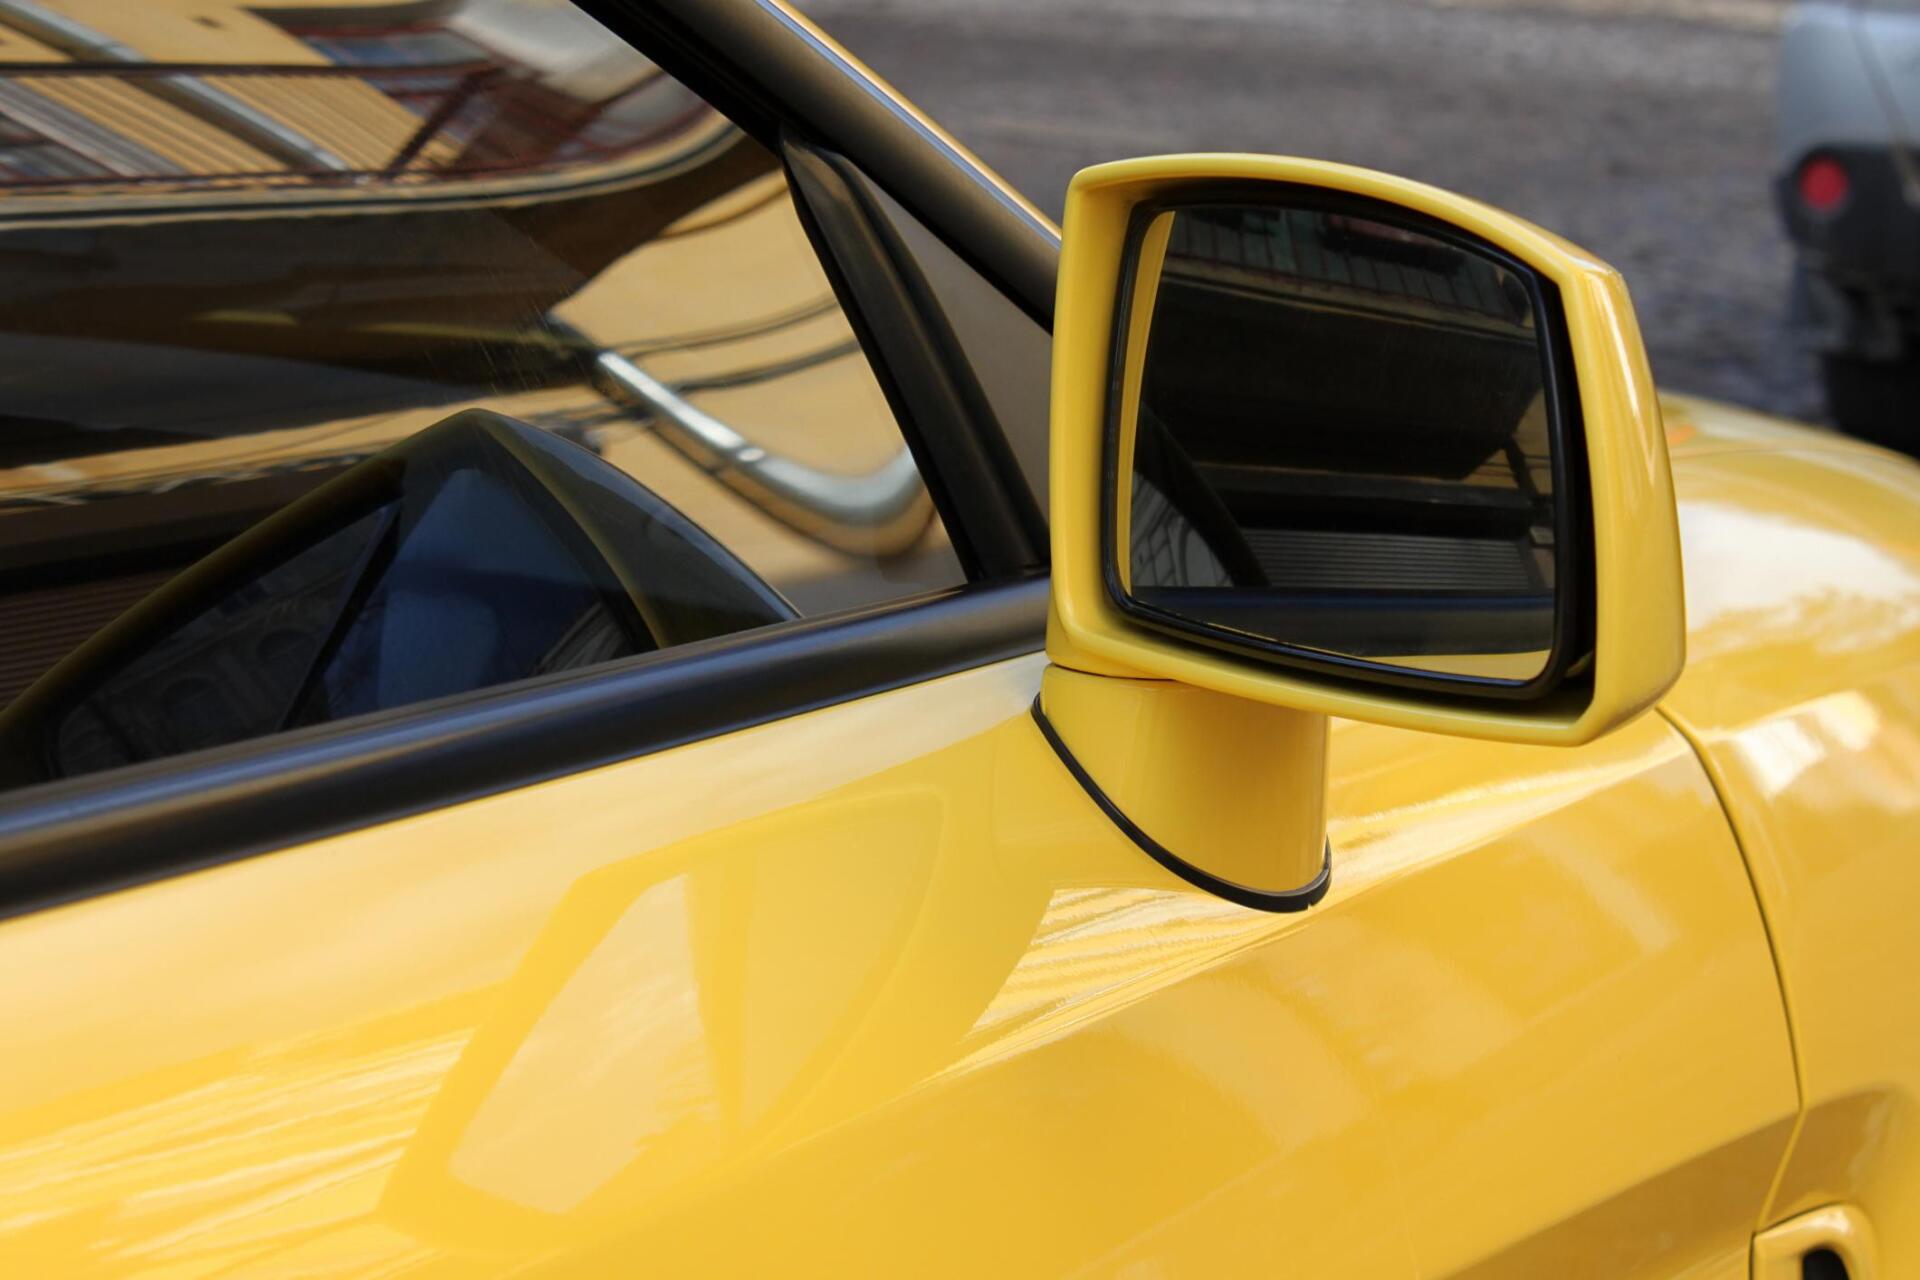 a side mirror of the car